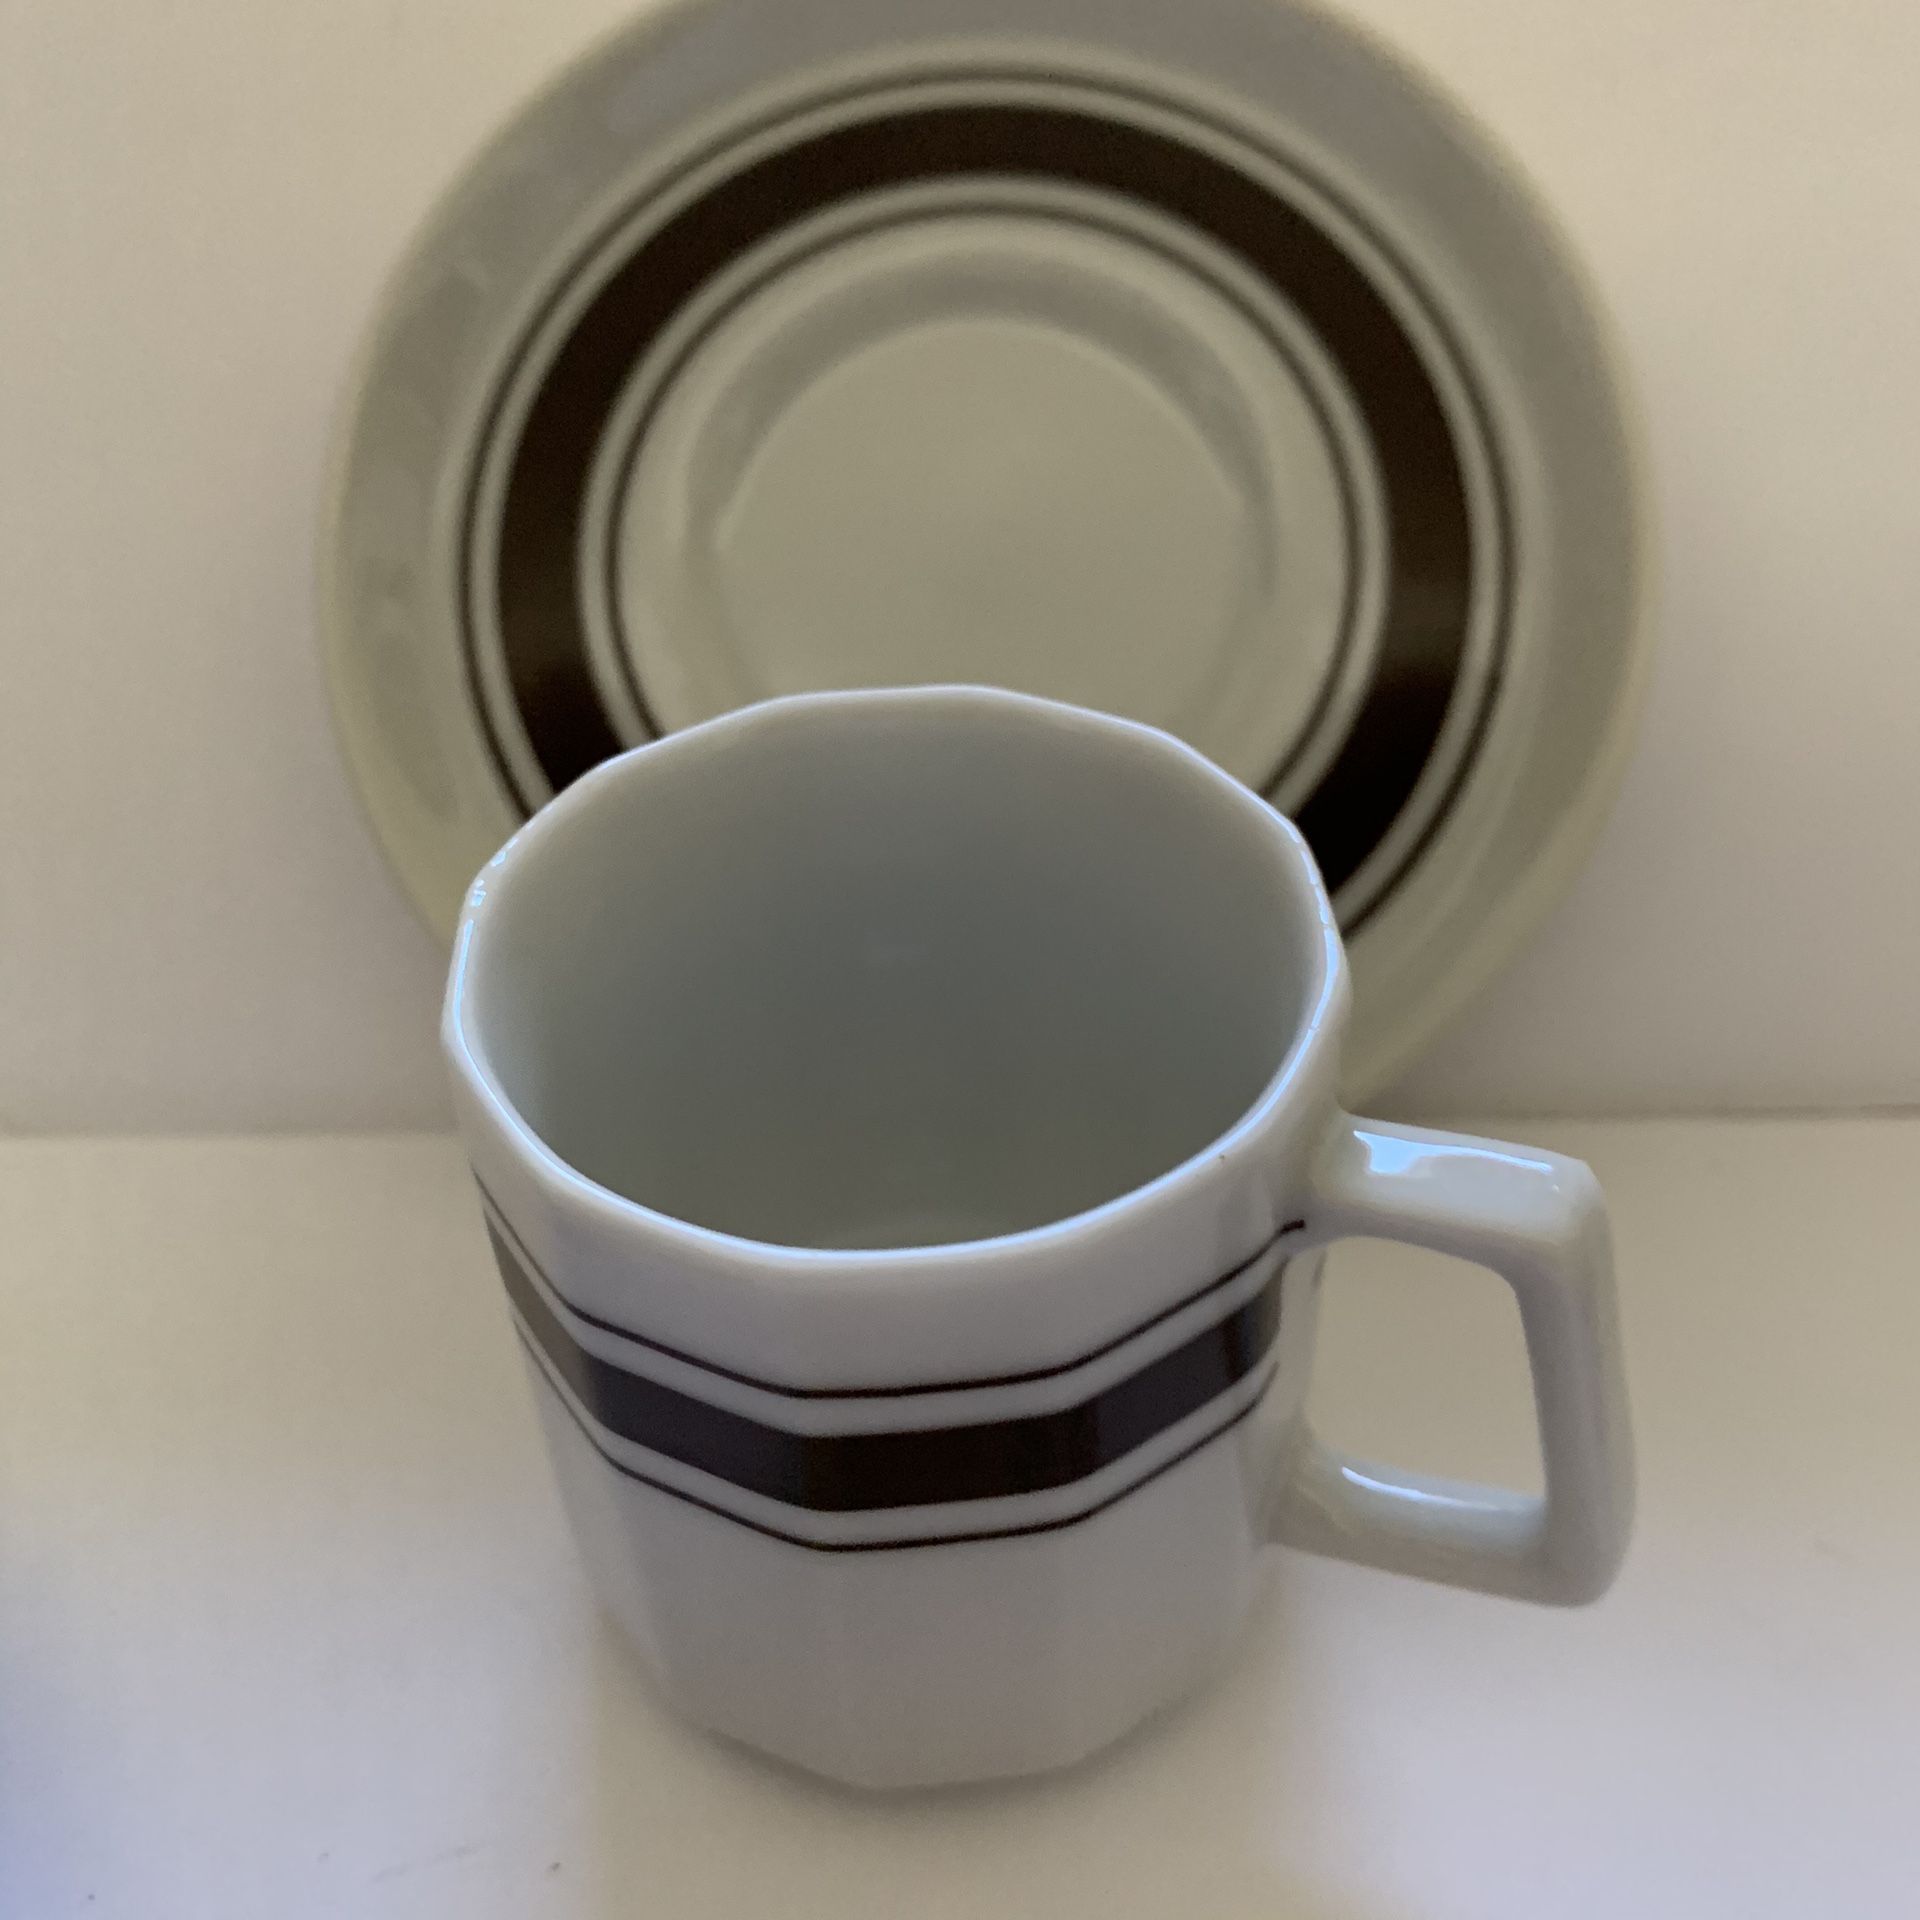 Sets of four specialty coffee cups and saucers